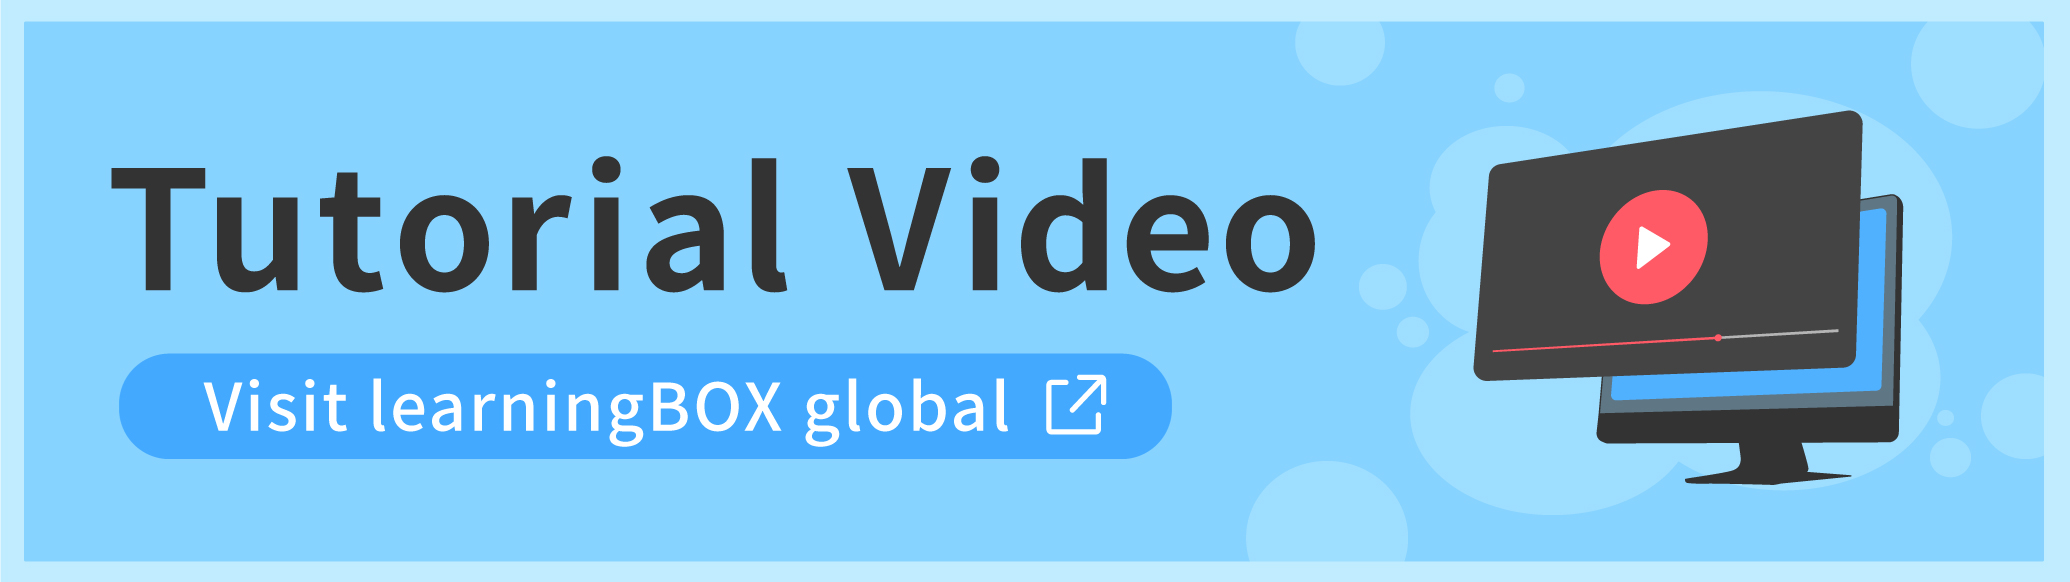 Link banner to video on how to use learningBOX